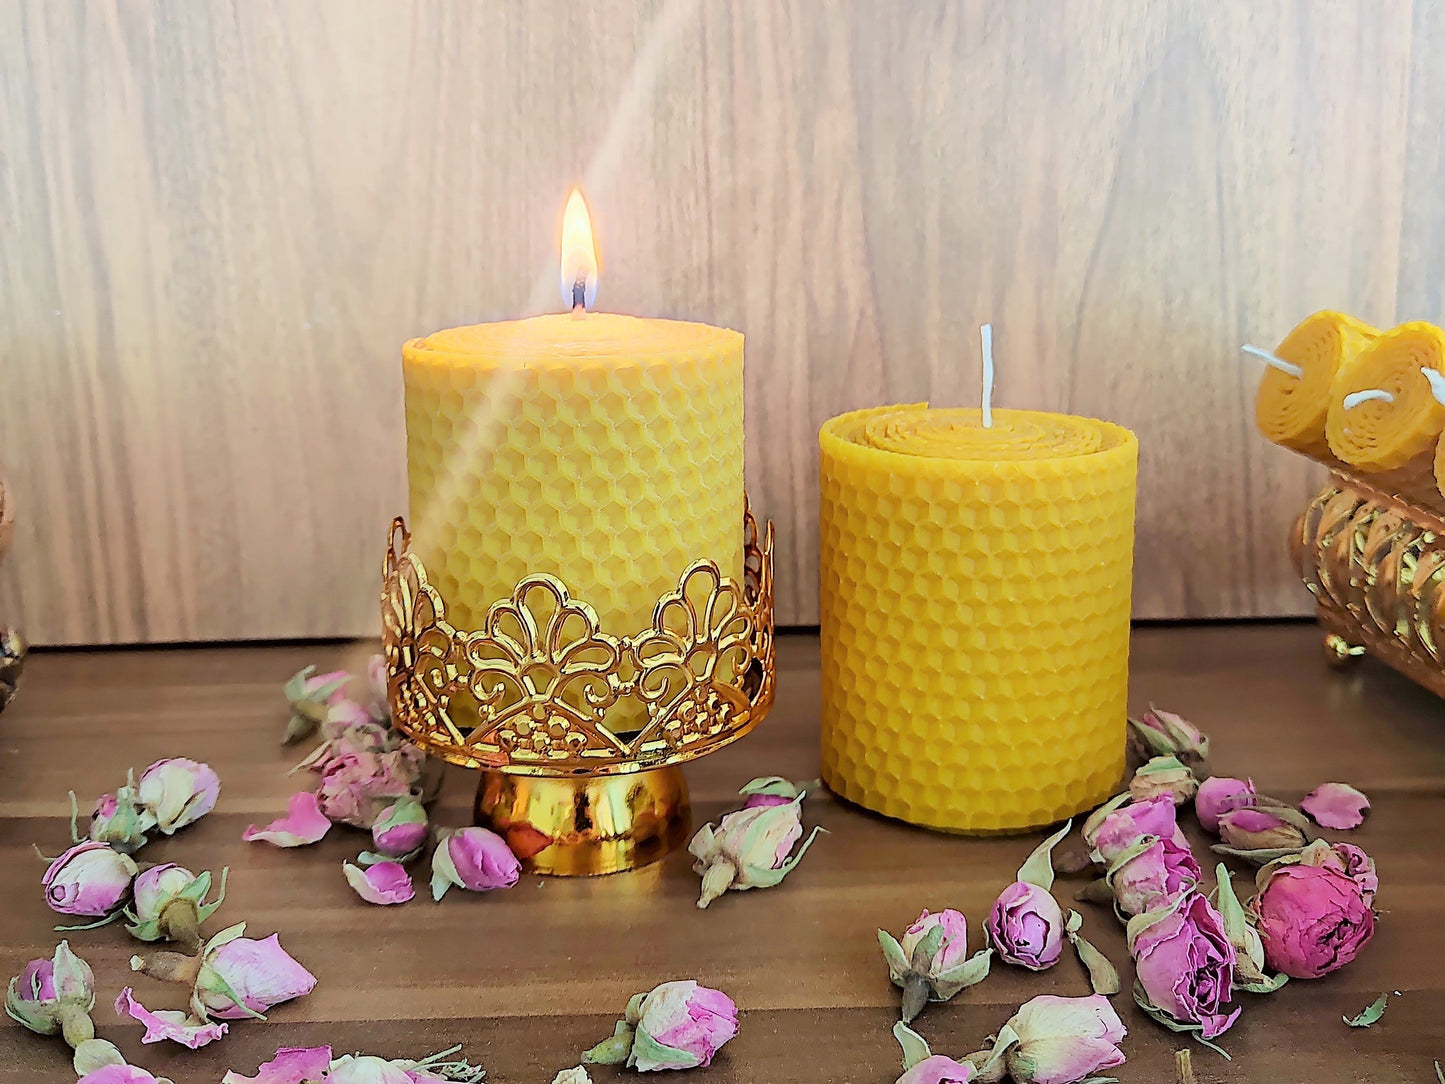 Wholesale Handmade Candles 7x7 cm Honeycomb Beeswax Candles